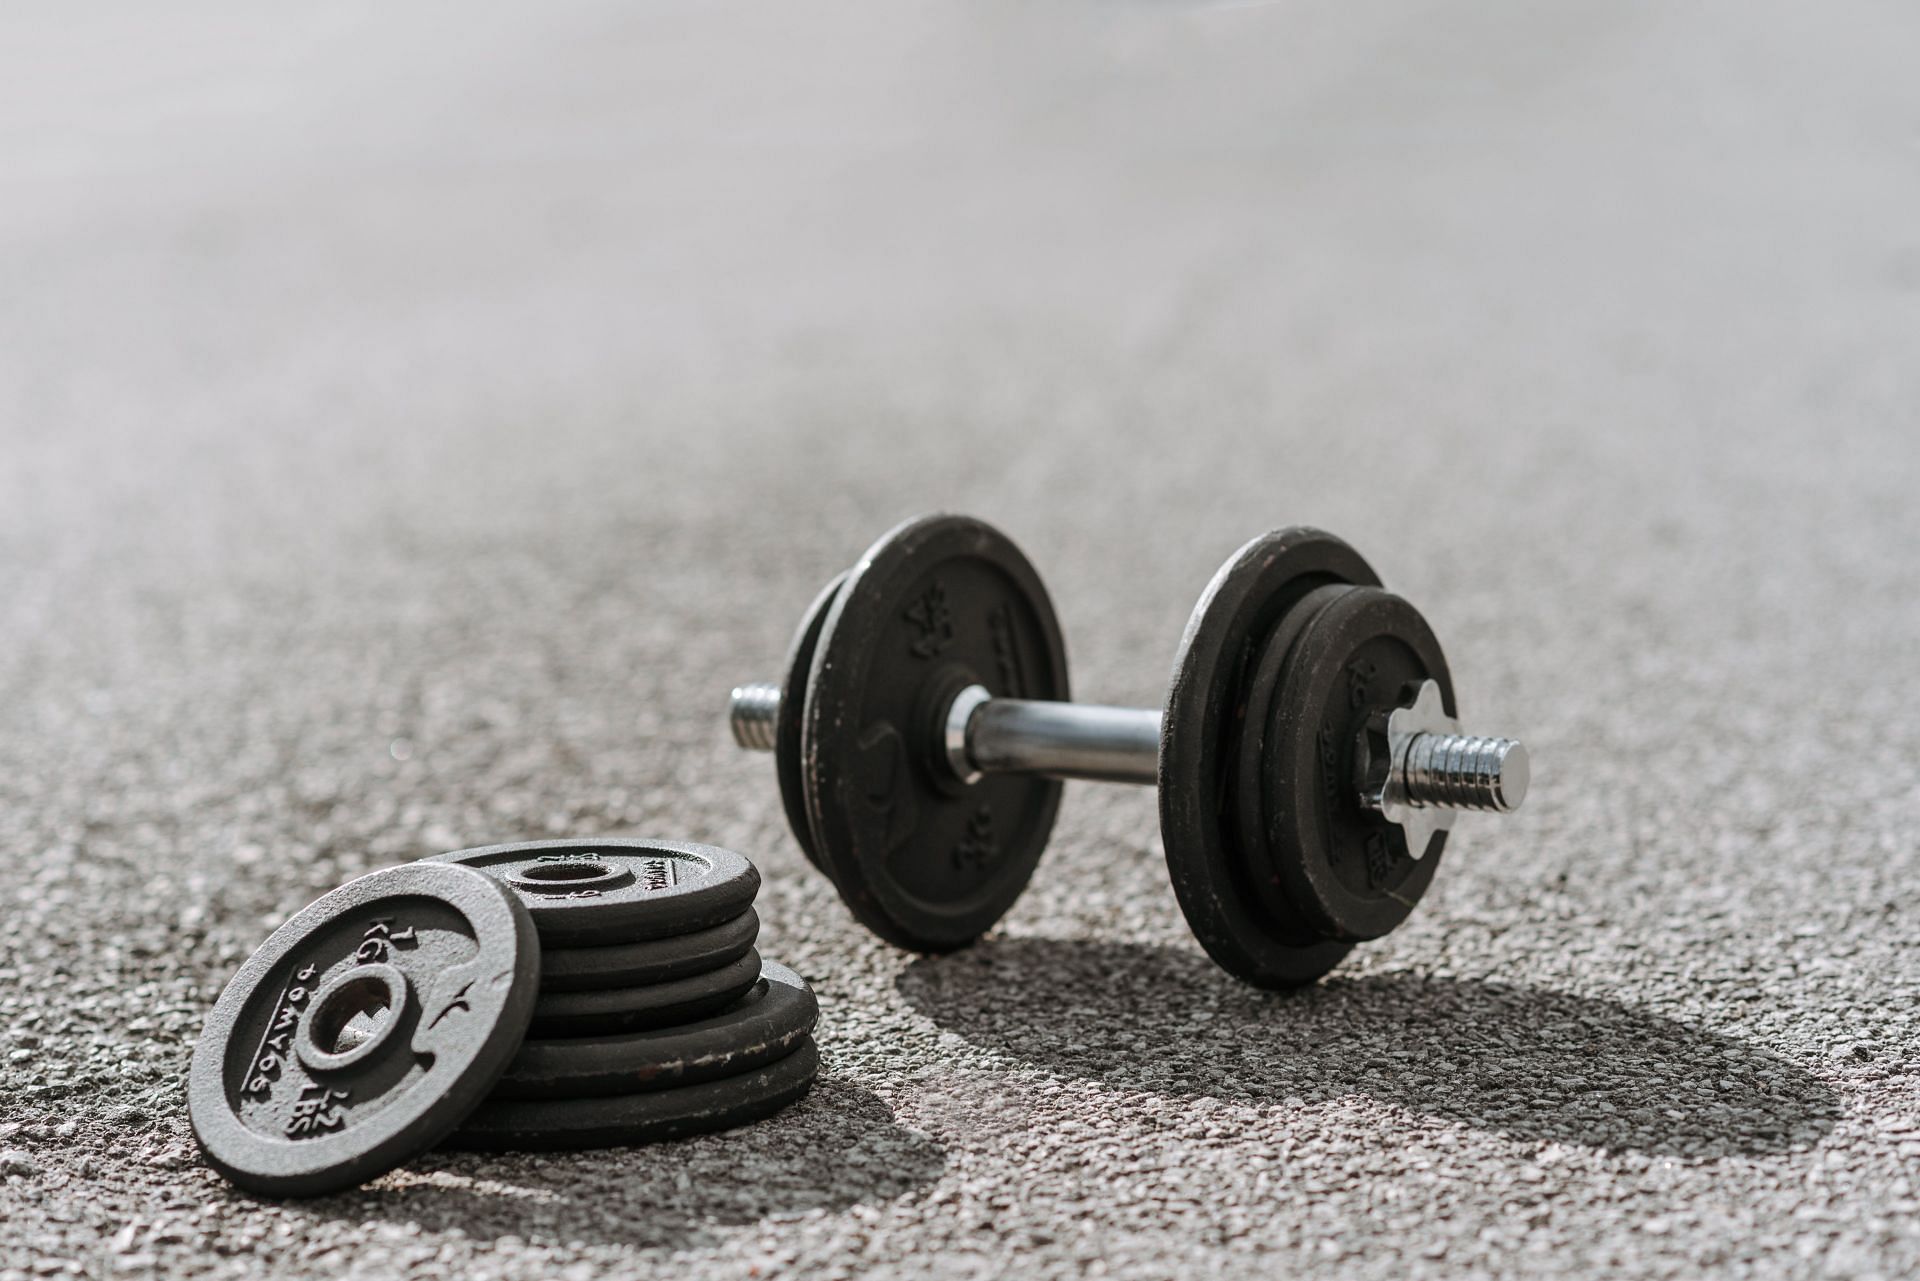 Dumbbells are a versatile and cost-effective option for weightlifting equipment at home (Photo by Anete Lusina/Pexels)